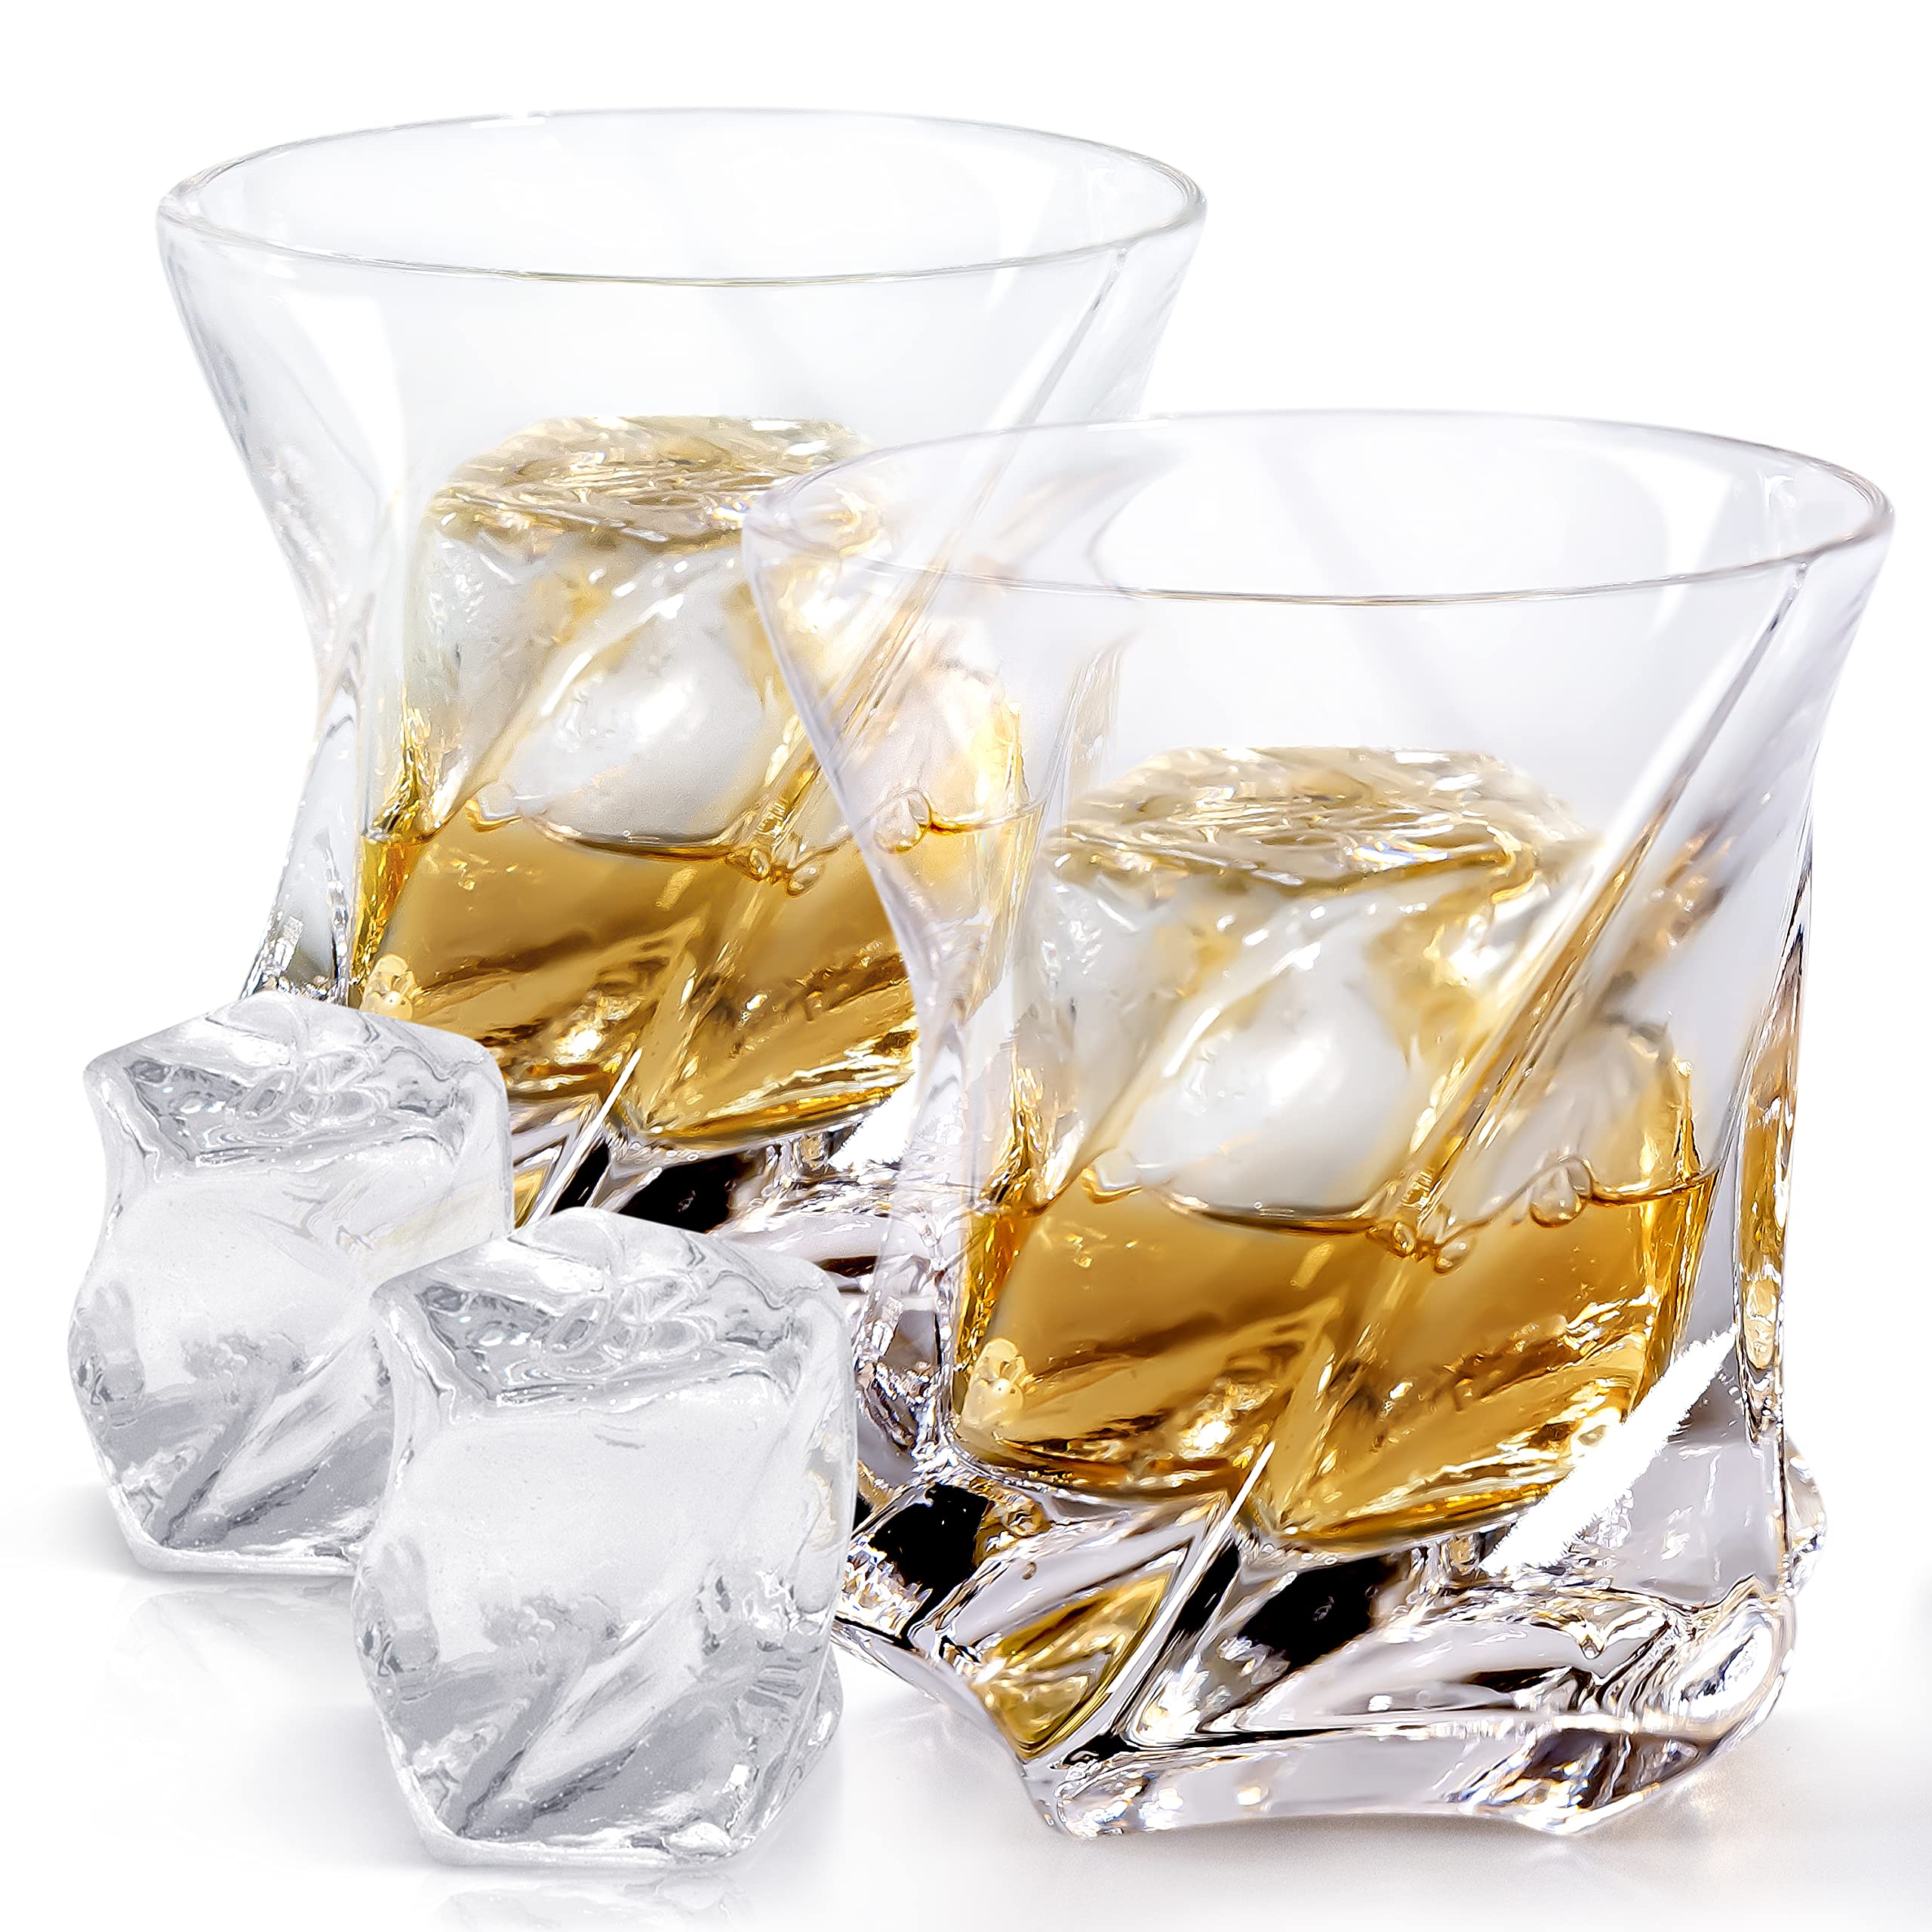 STAR Whiskey Glasses Heavy Tumbler – Elevate your Drinking Experience Whiskey Set of 2 Hand Blown, Cystal, Bourbon Glass (7oz) w/ Matching Ice Mold Glassware sets gifts for Men, Rock Glasses